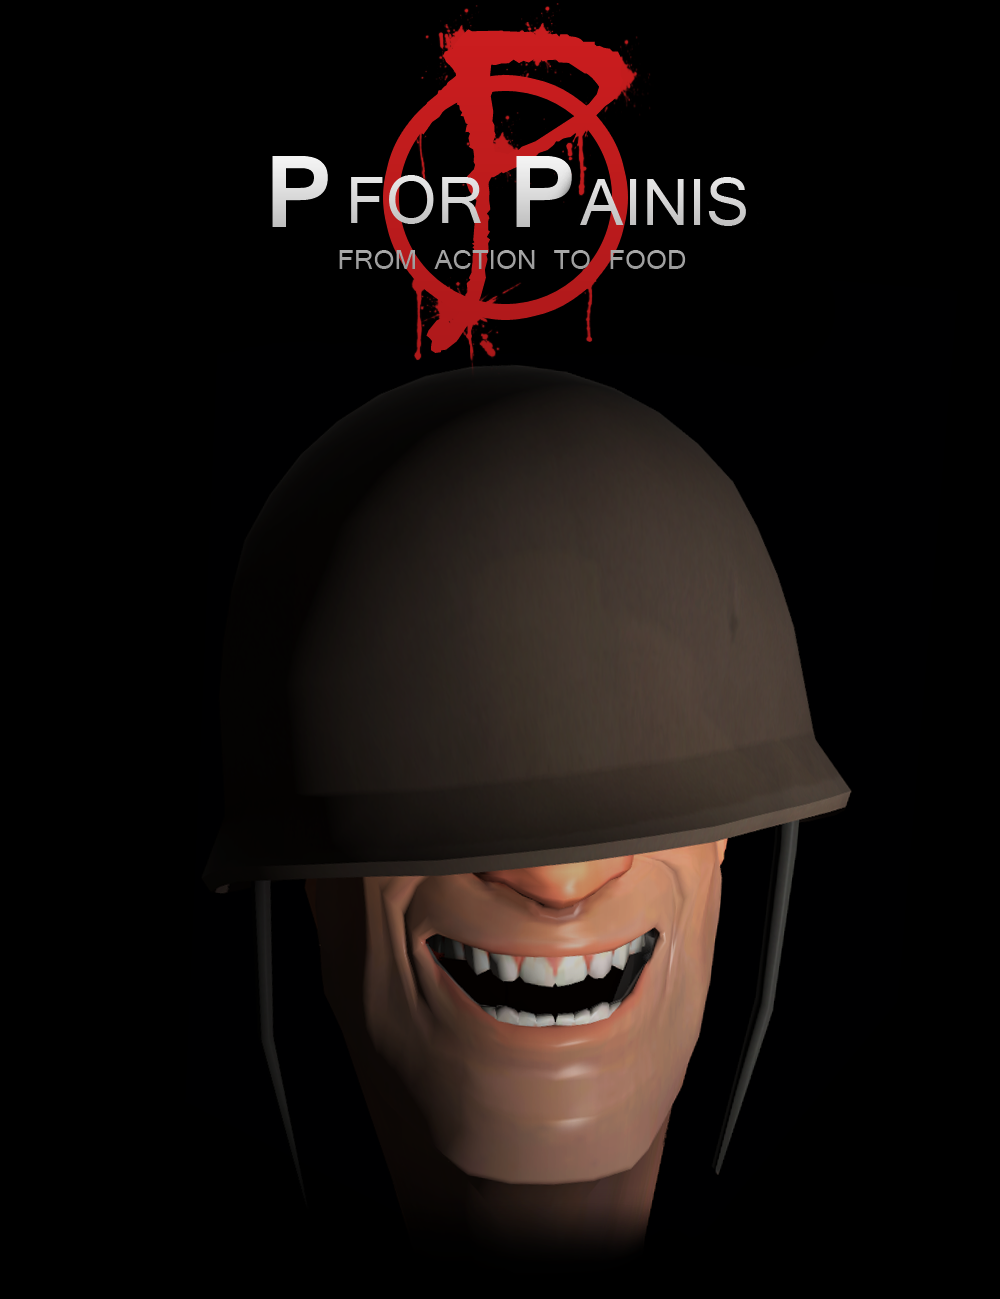 p_for_painis_by_stblackst-d4ytff4.png